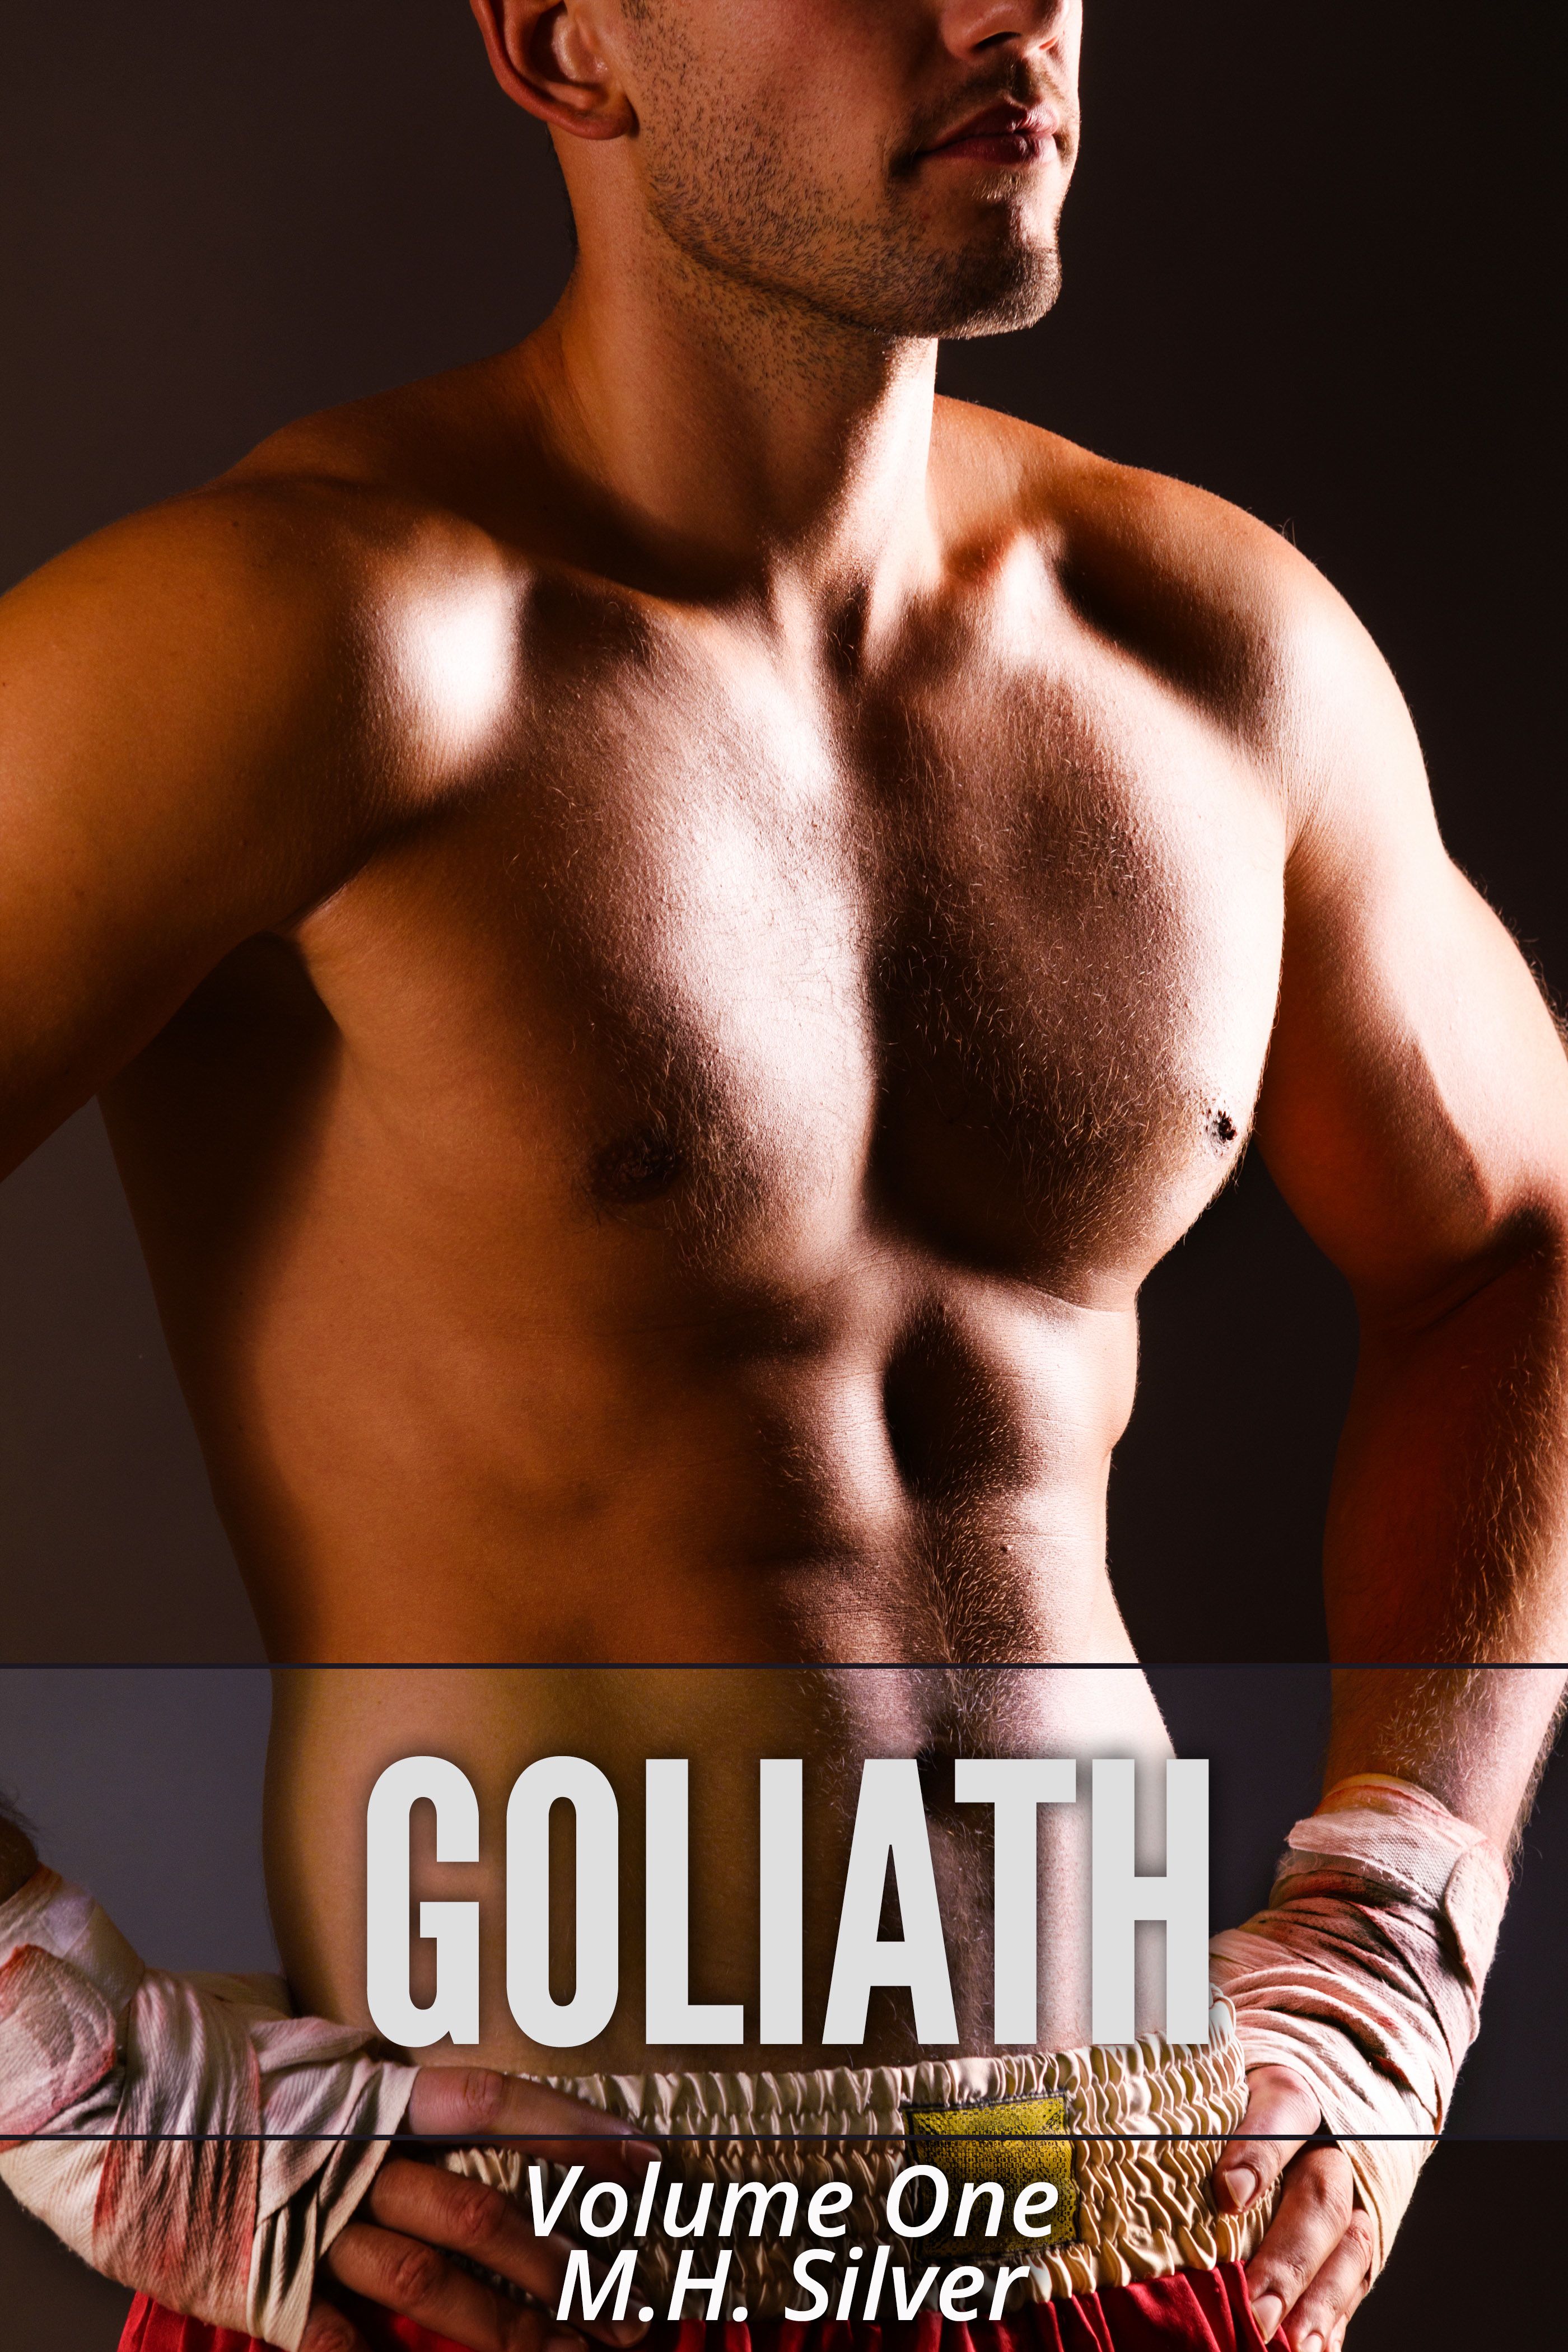 Goliath, Volume One by M.H. Silver